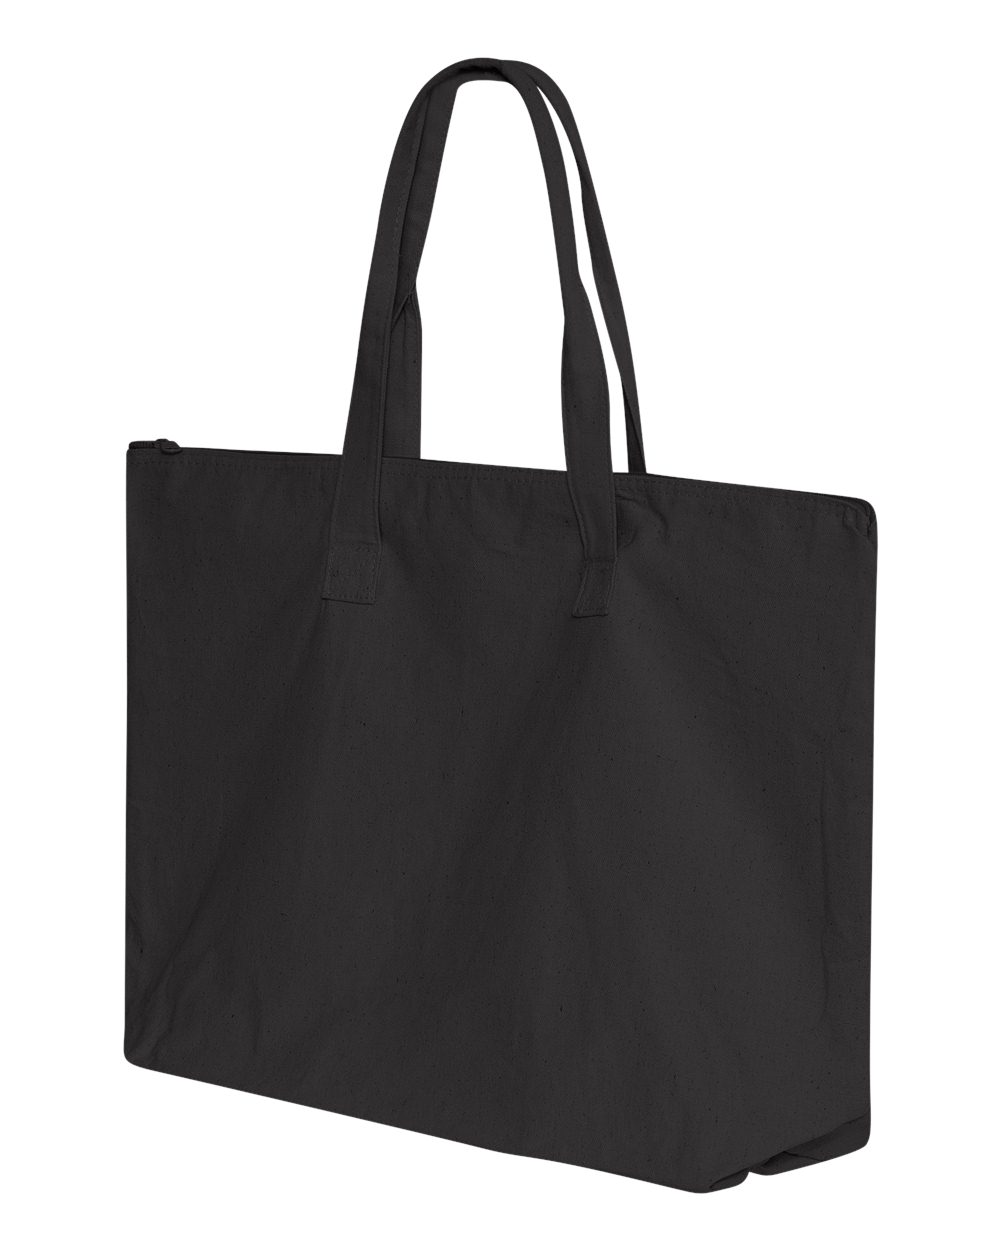 Liberty Bags 8863-10 Ounce Canvas Tote with Zipper Top Closure